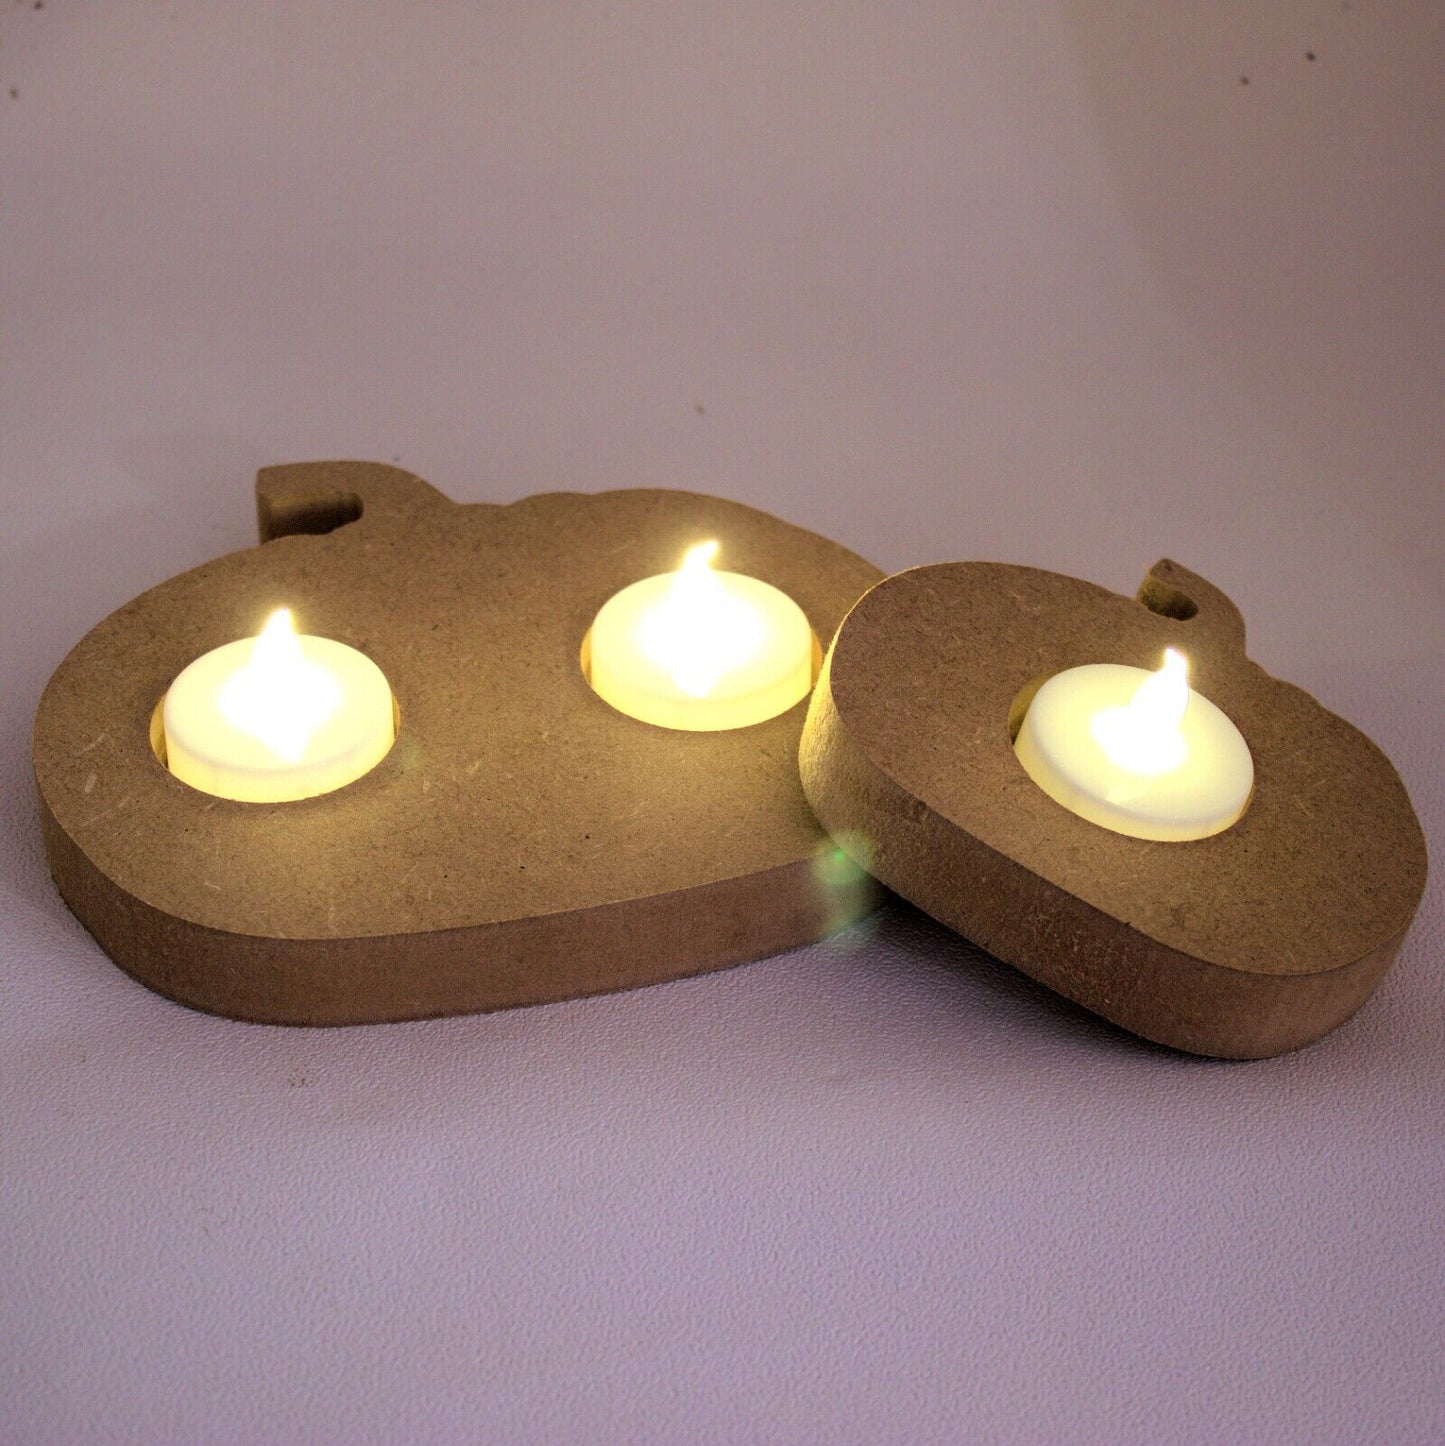 MDF Wood Pumpkin Tea Light Candle Holder to Decorate for Halloween. 2 Sizes